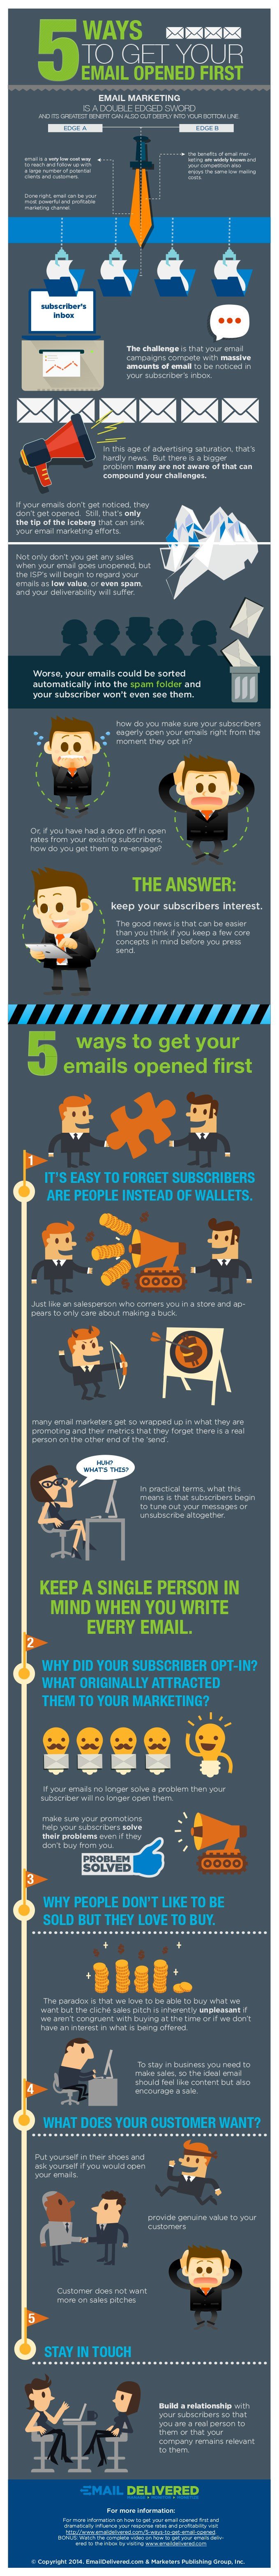 1406233153-5-ways-make-sure-emails-get-opened-infographic